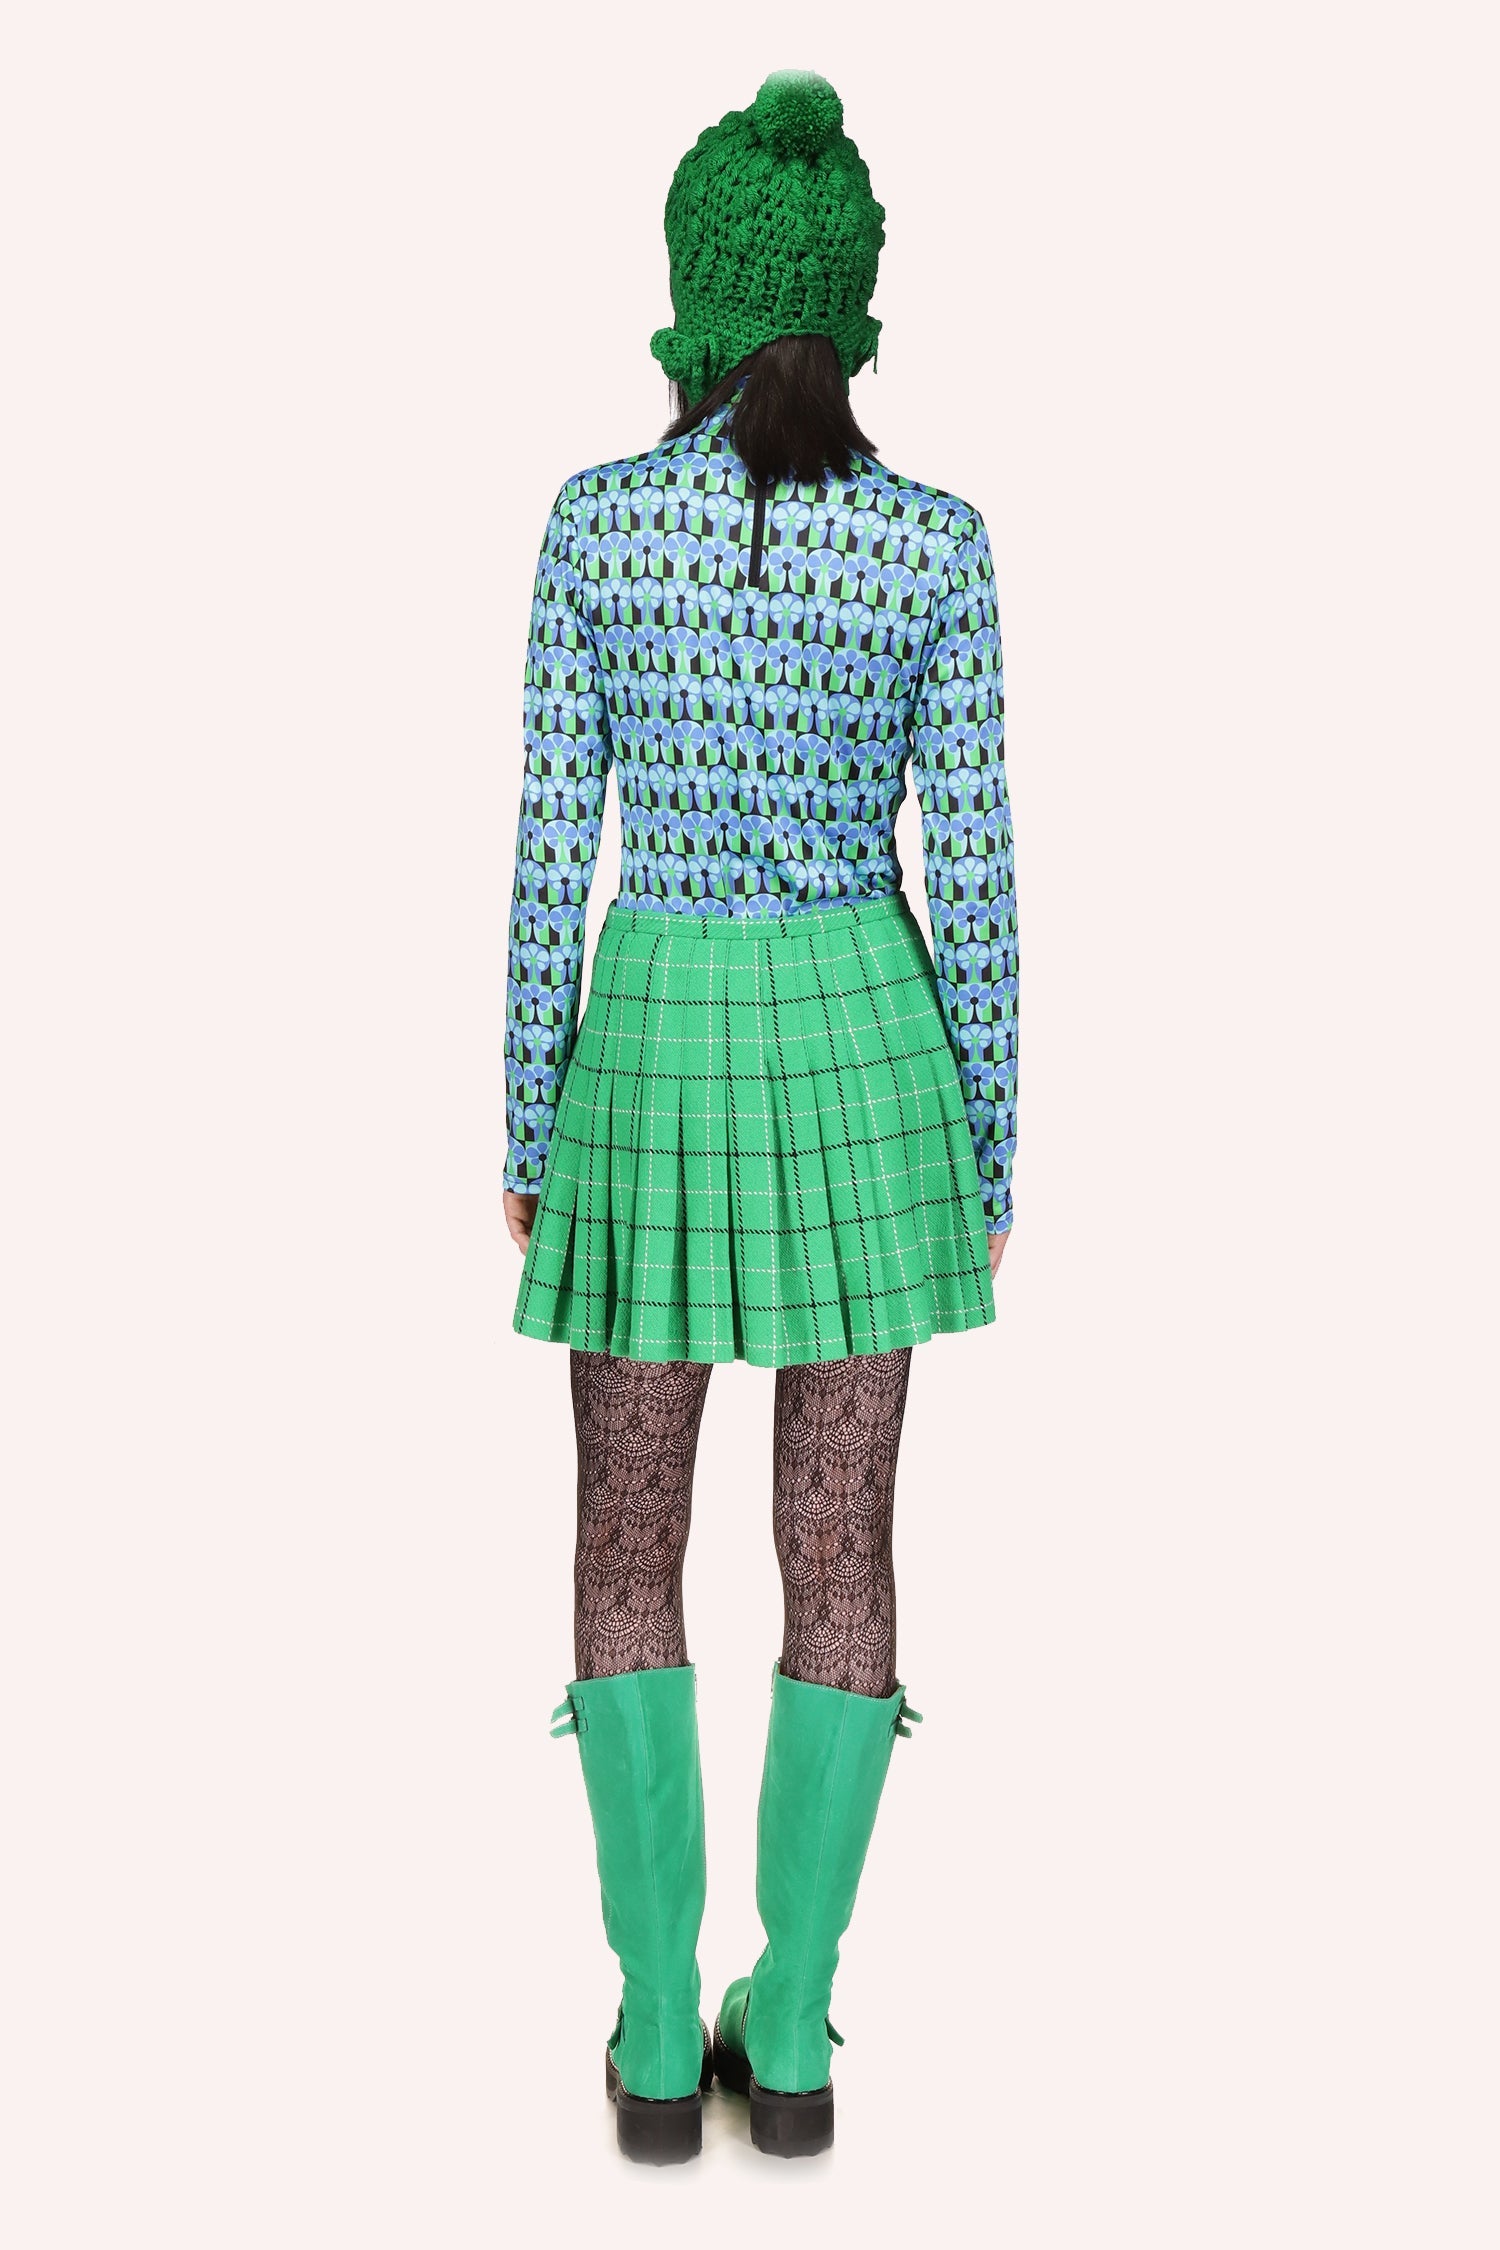 Anna Sui's Lycra Turtleneck Cornflower shade, long sleeves, Lycra fabric with delightful pattern zip in back